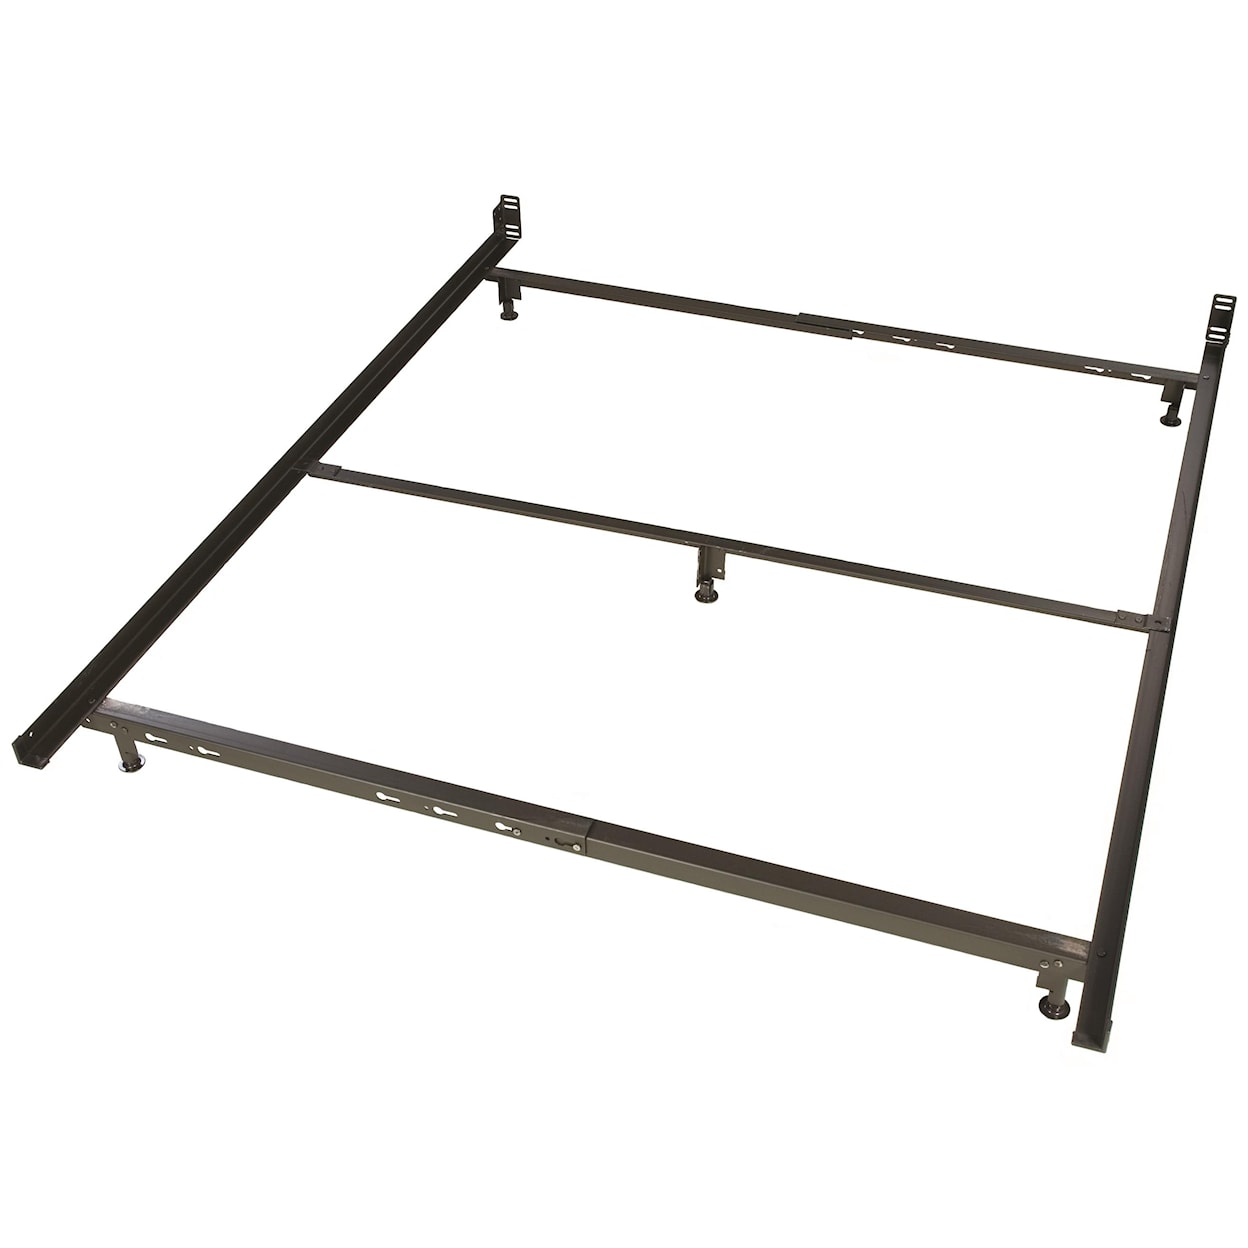 Glideaway Low Profile Bed Frames 5 Leg Queen Low Profile Bed Frame